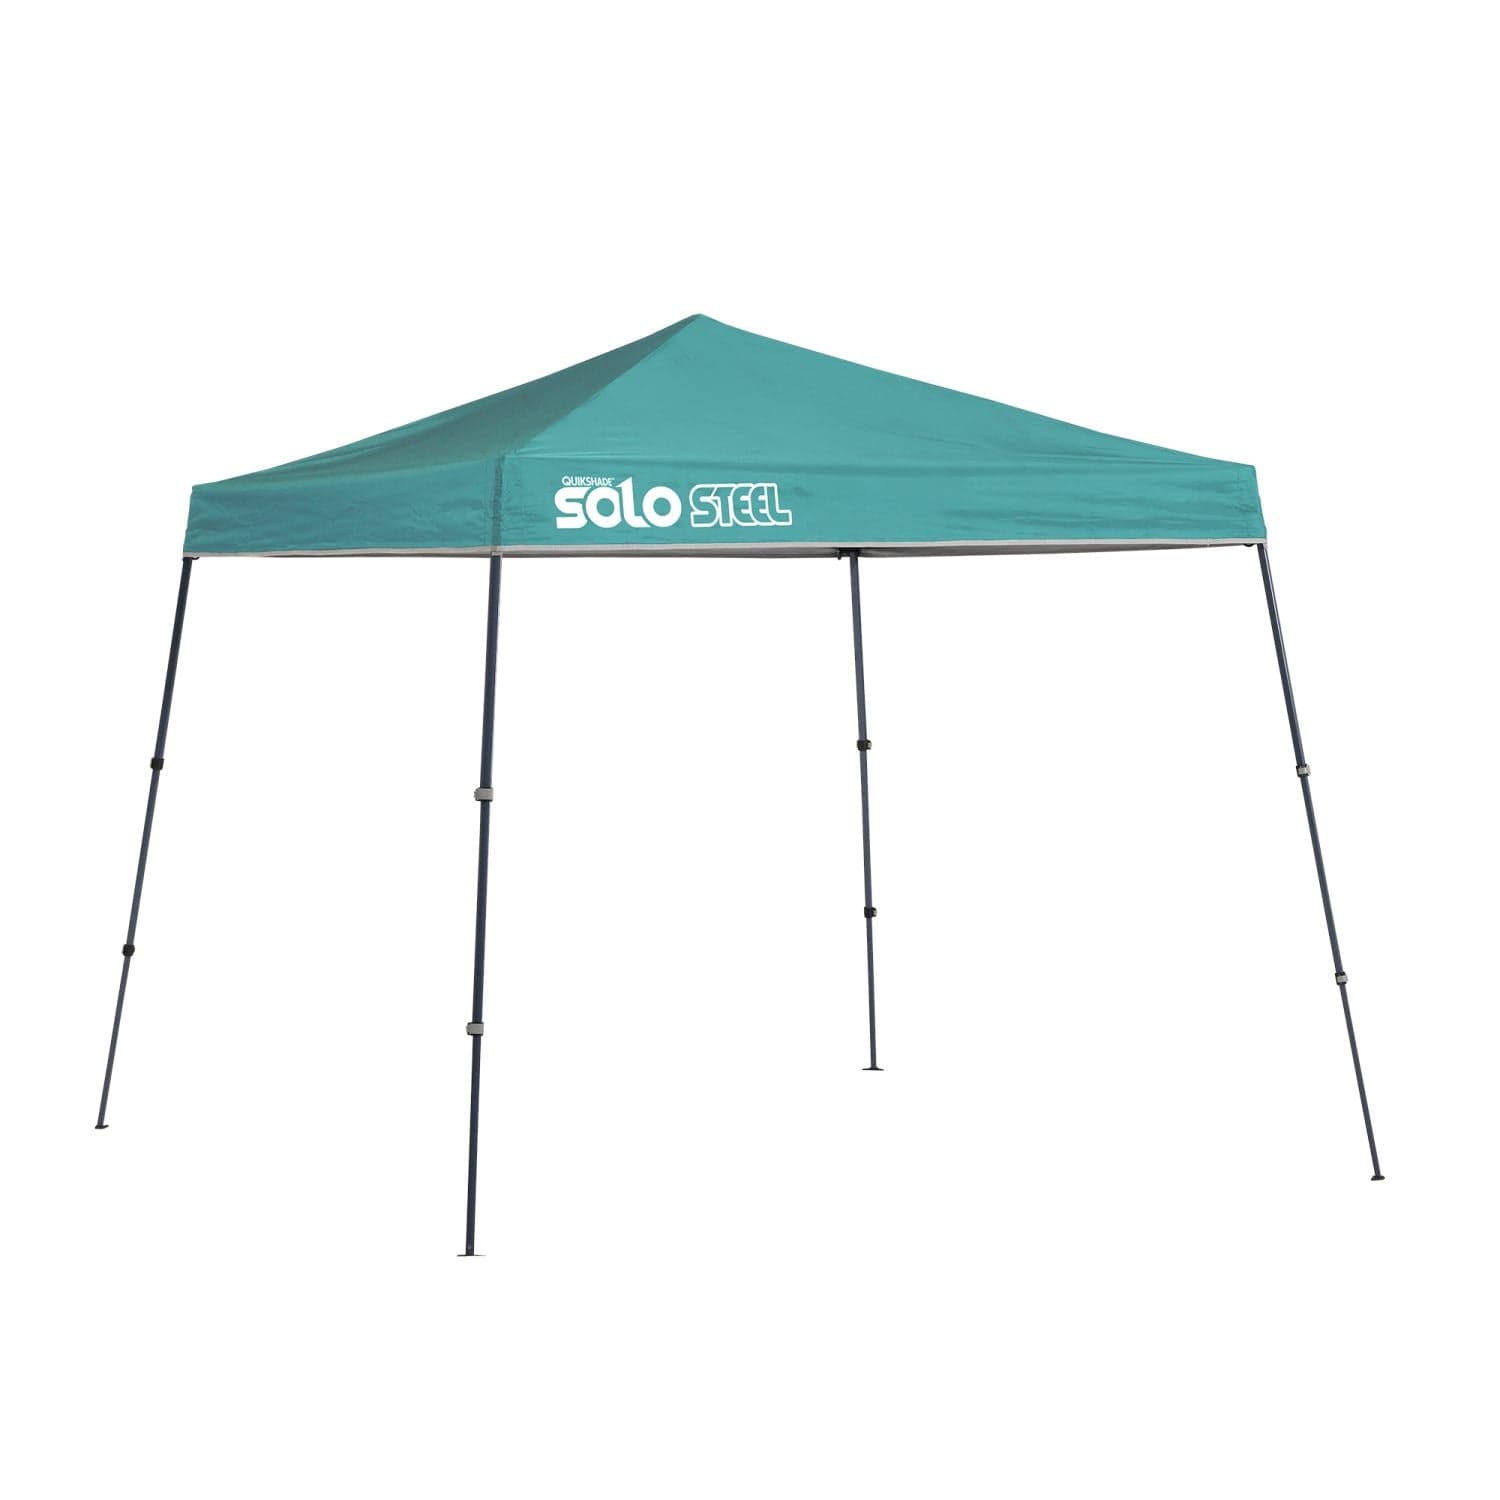 Quik Shade Pop Up Canopies Quik Shade | Solo Steel 50 9' x 9' Slant Leg Canopy - Turquoise 167533DS